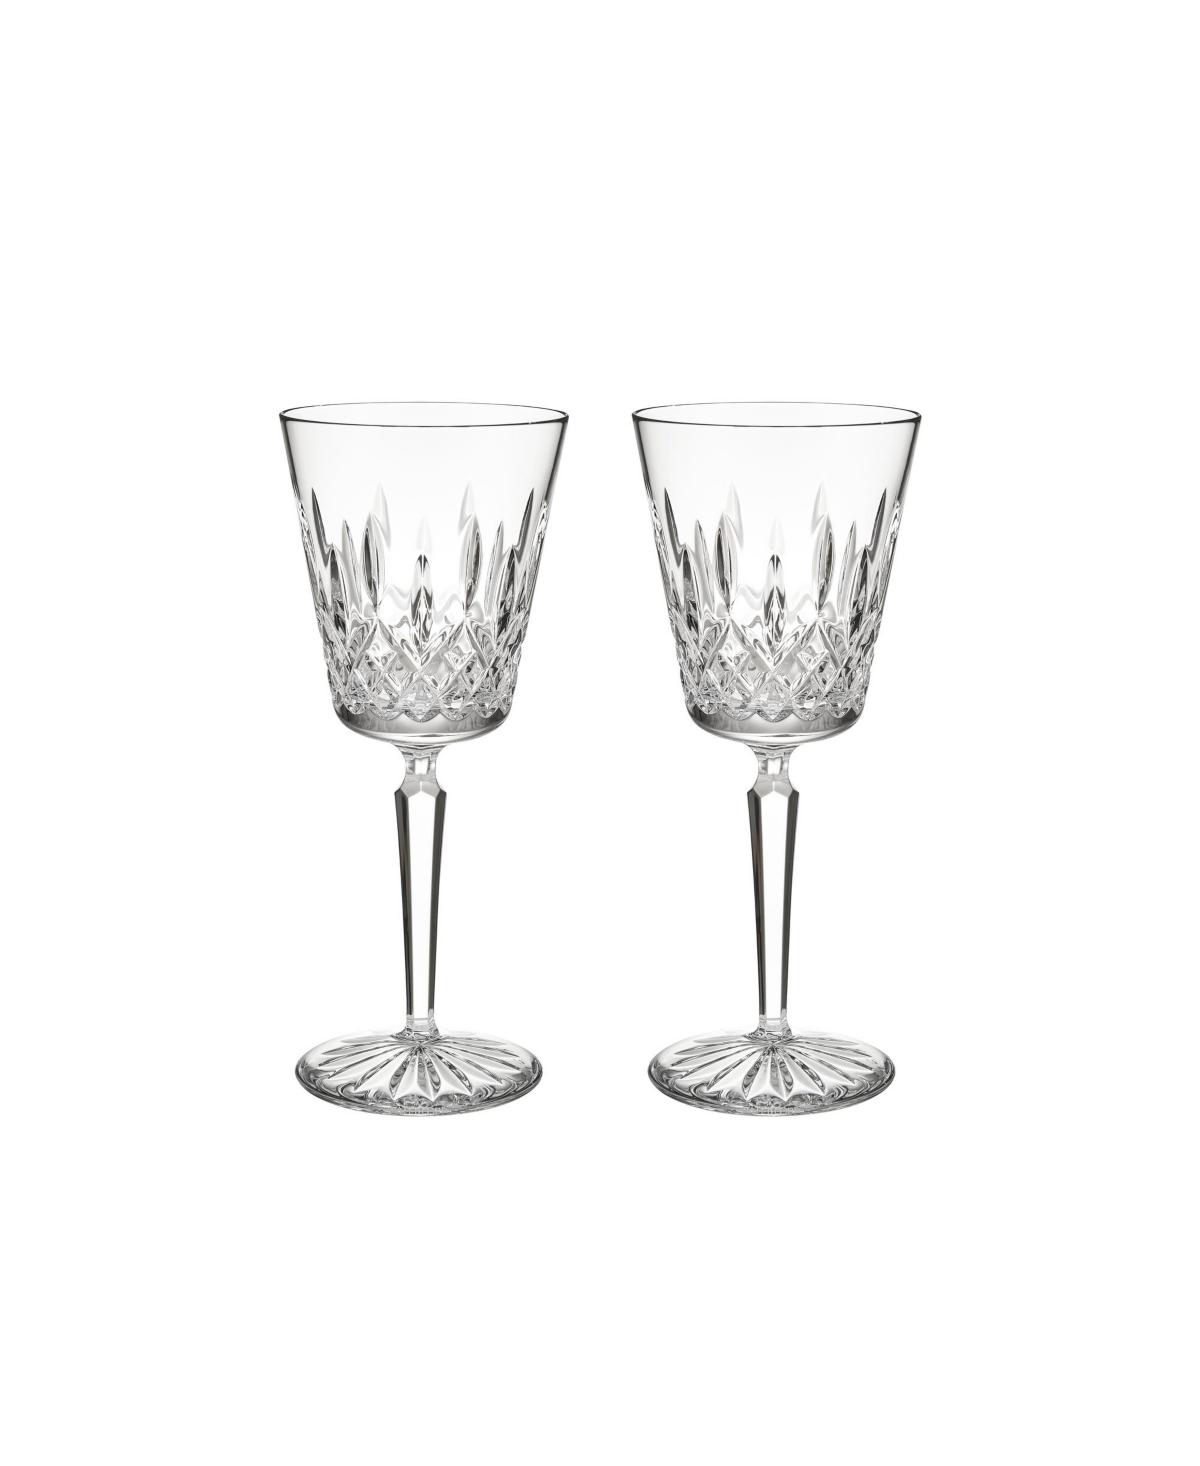 Waterford Lismore 2 Piece Tall Medium Goblet Set, 11.5 oz In Clear